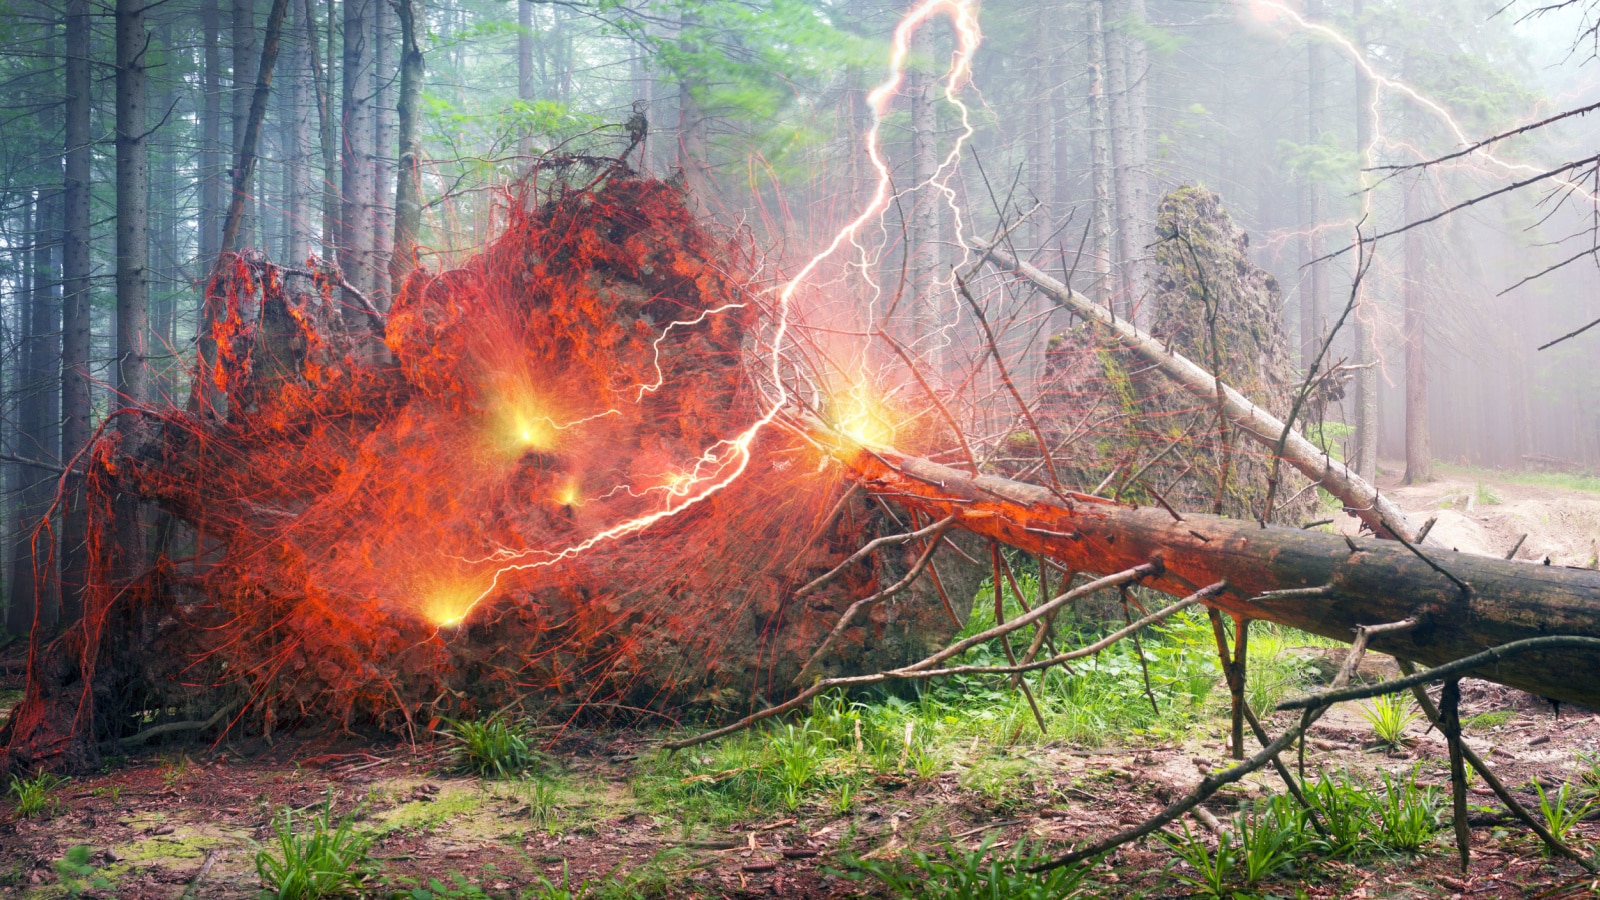 Lightning during a storm hit the tree and caught fire dangerous fire. Carpathian Mountains - a legendary place and a fabulous beauty and mystery, imagination and fantasy, fairy tale and reality